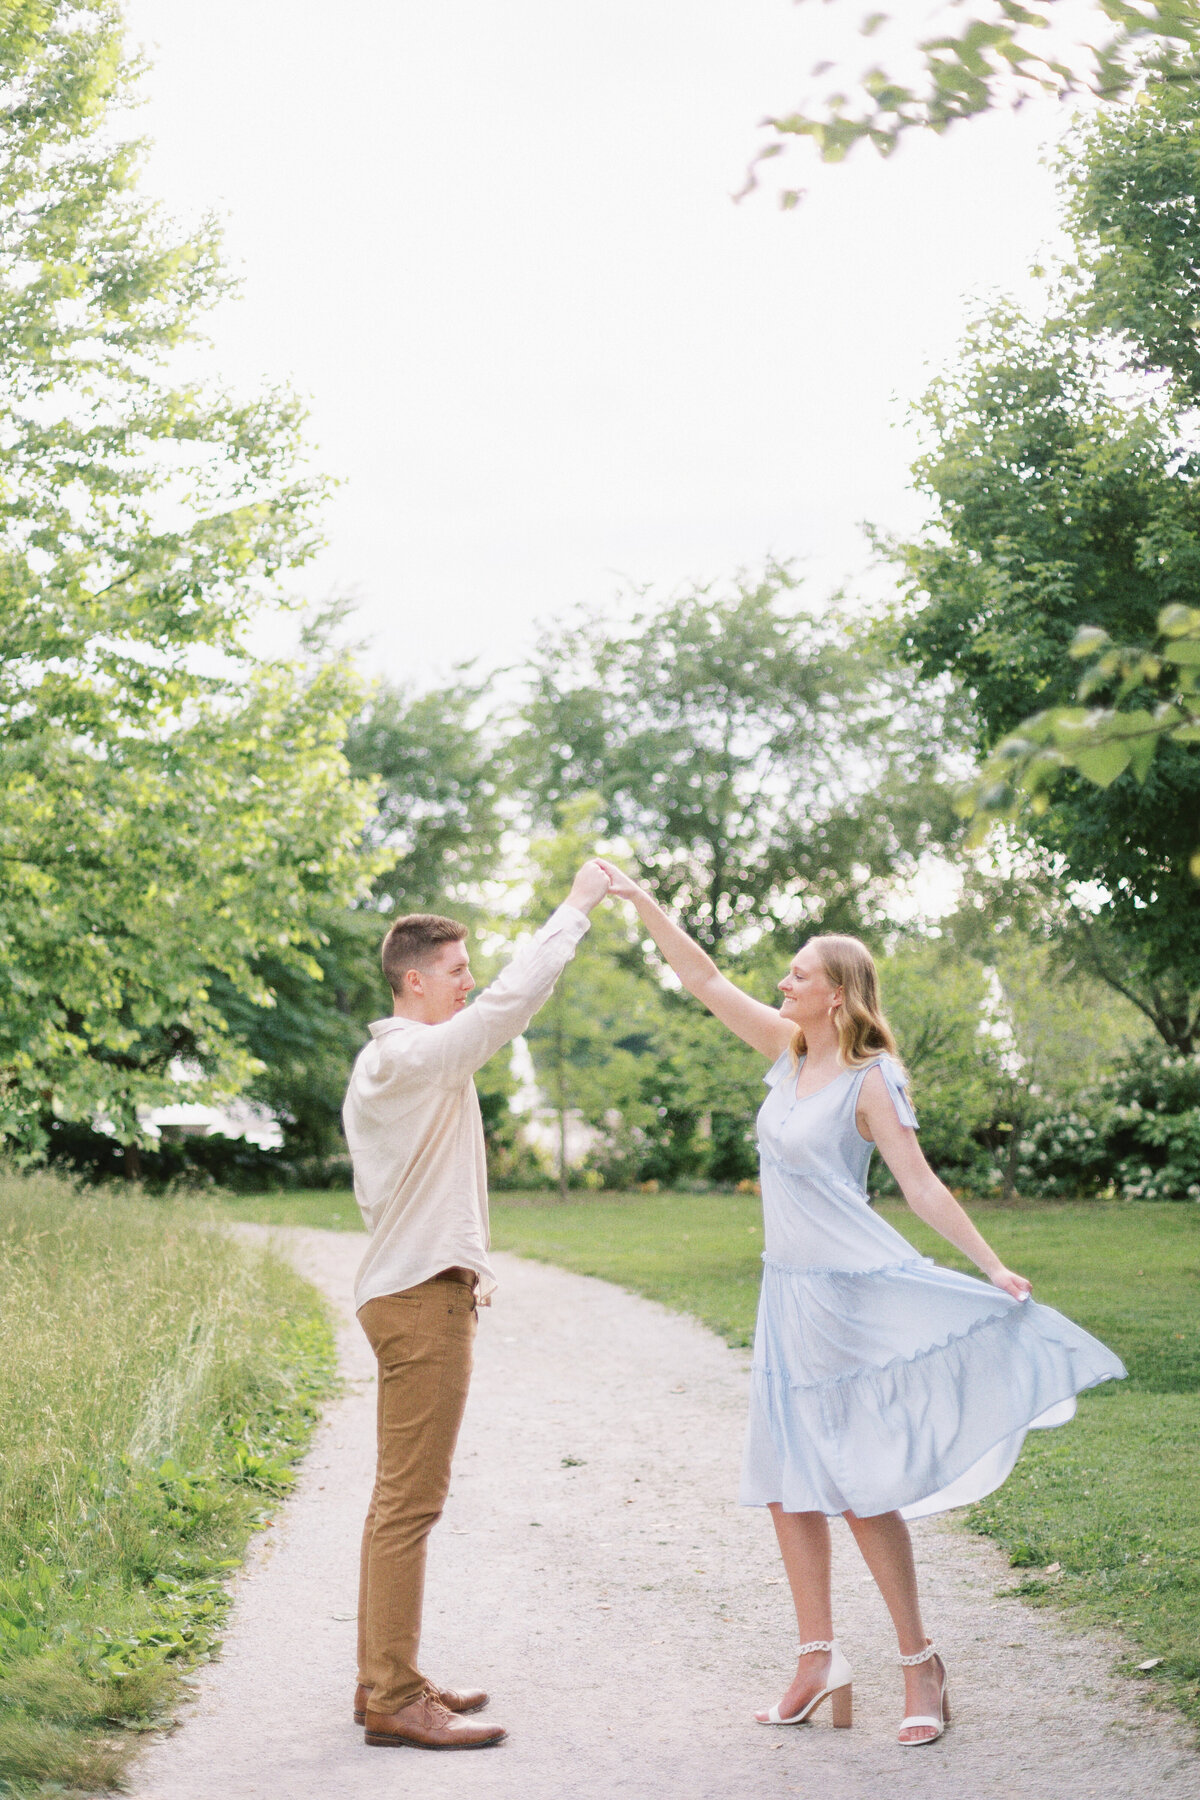 amber-rhea-photography-midwest-wedding-photographer-stl-engagement210A5023